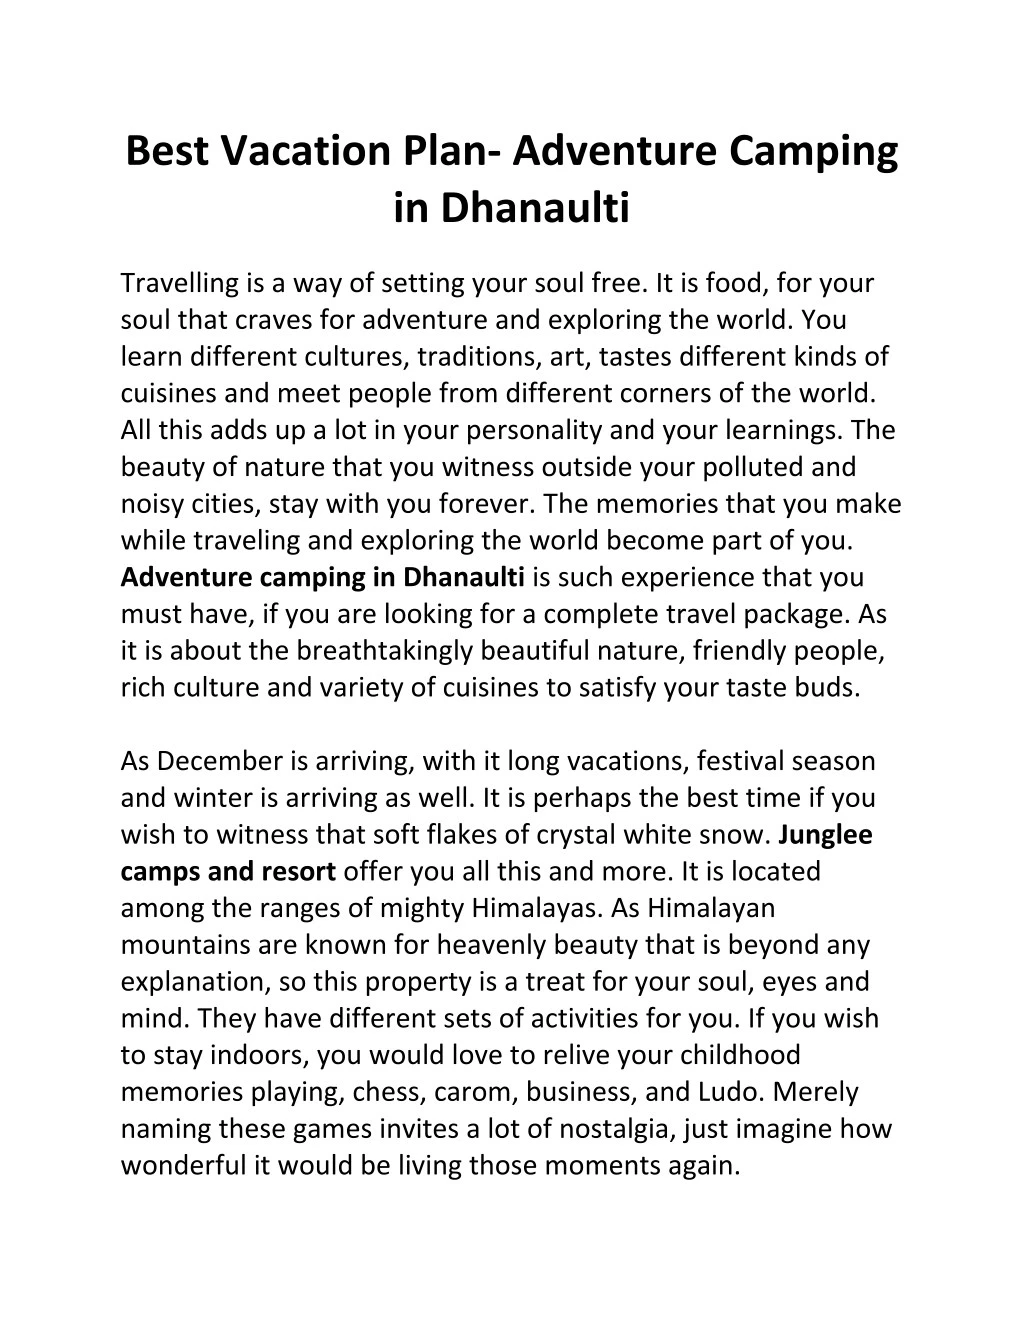 best vacation plan adventure camping in dhanaulti